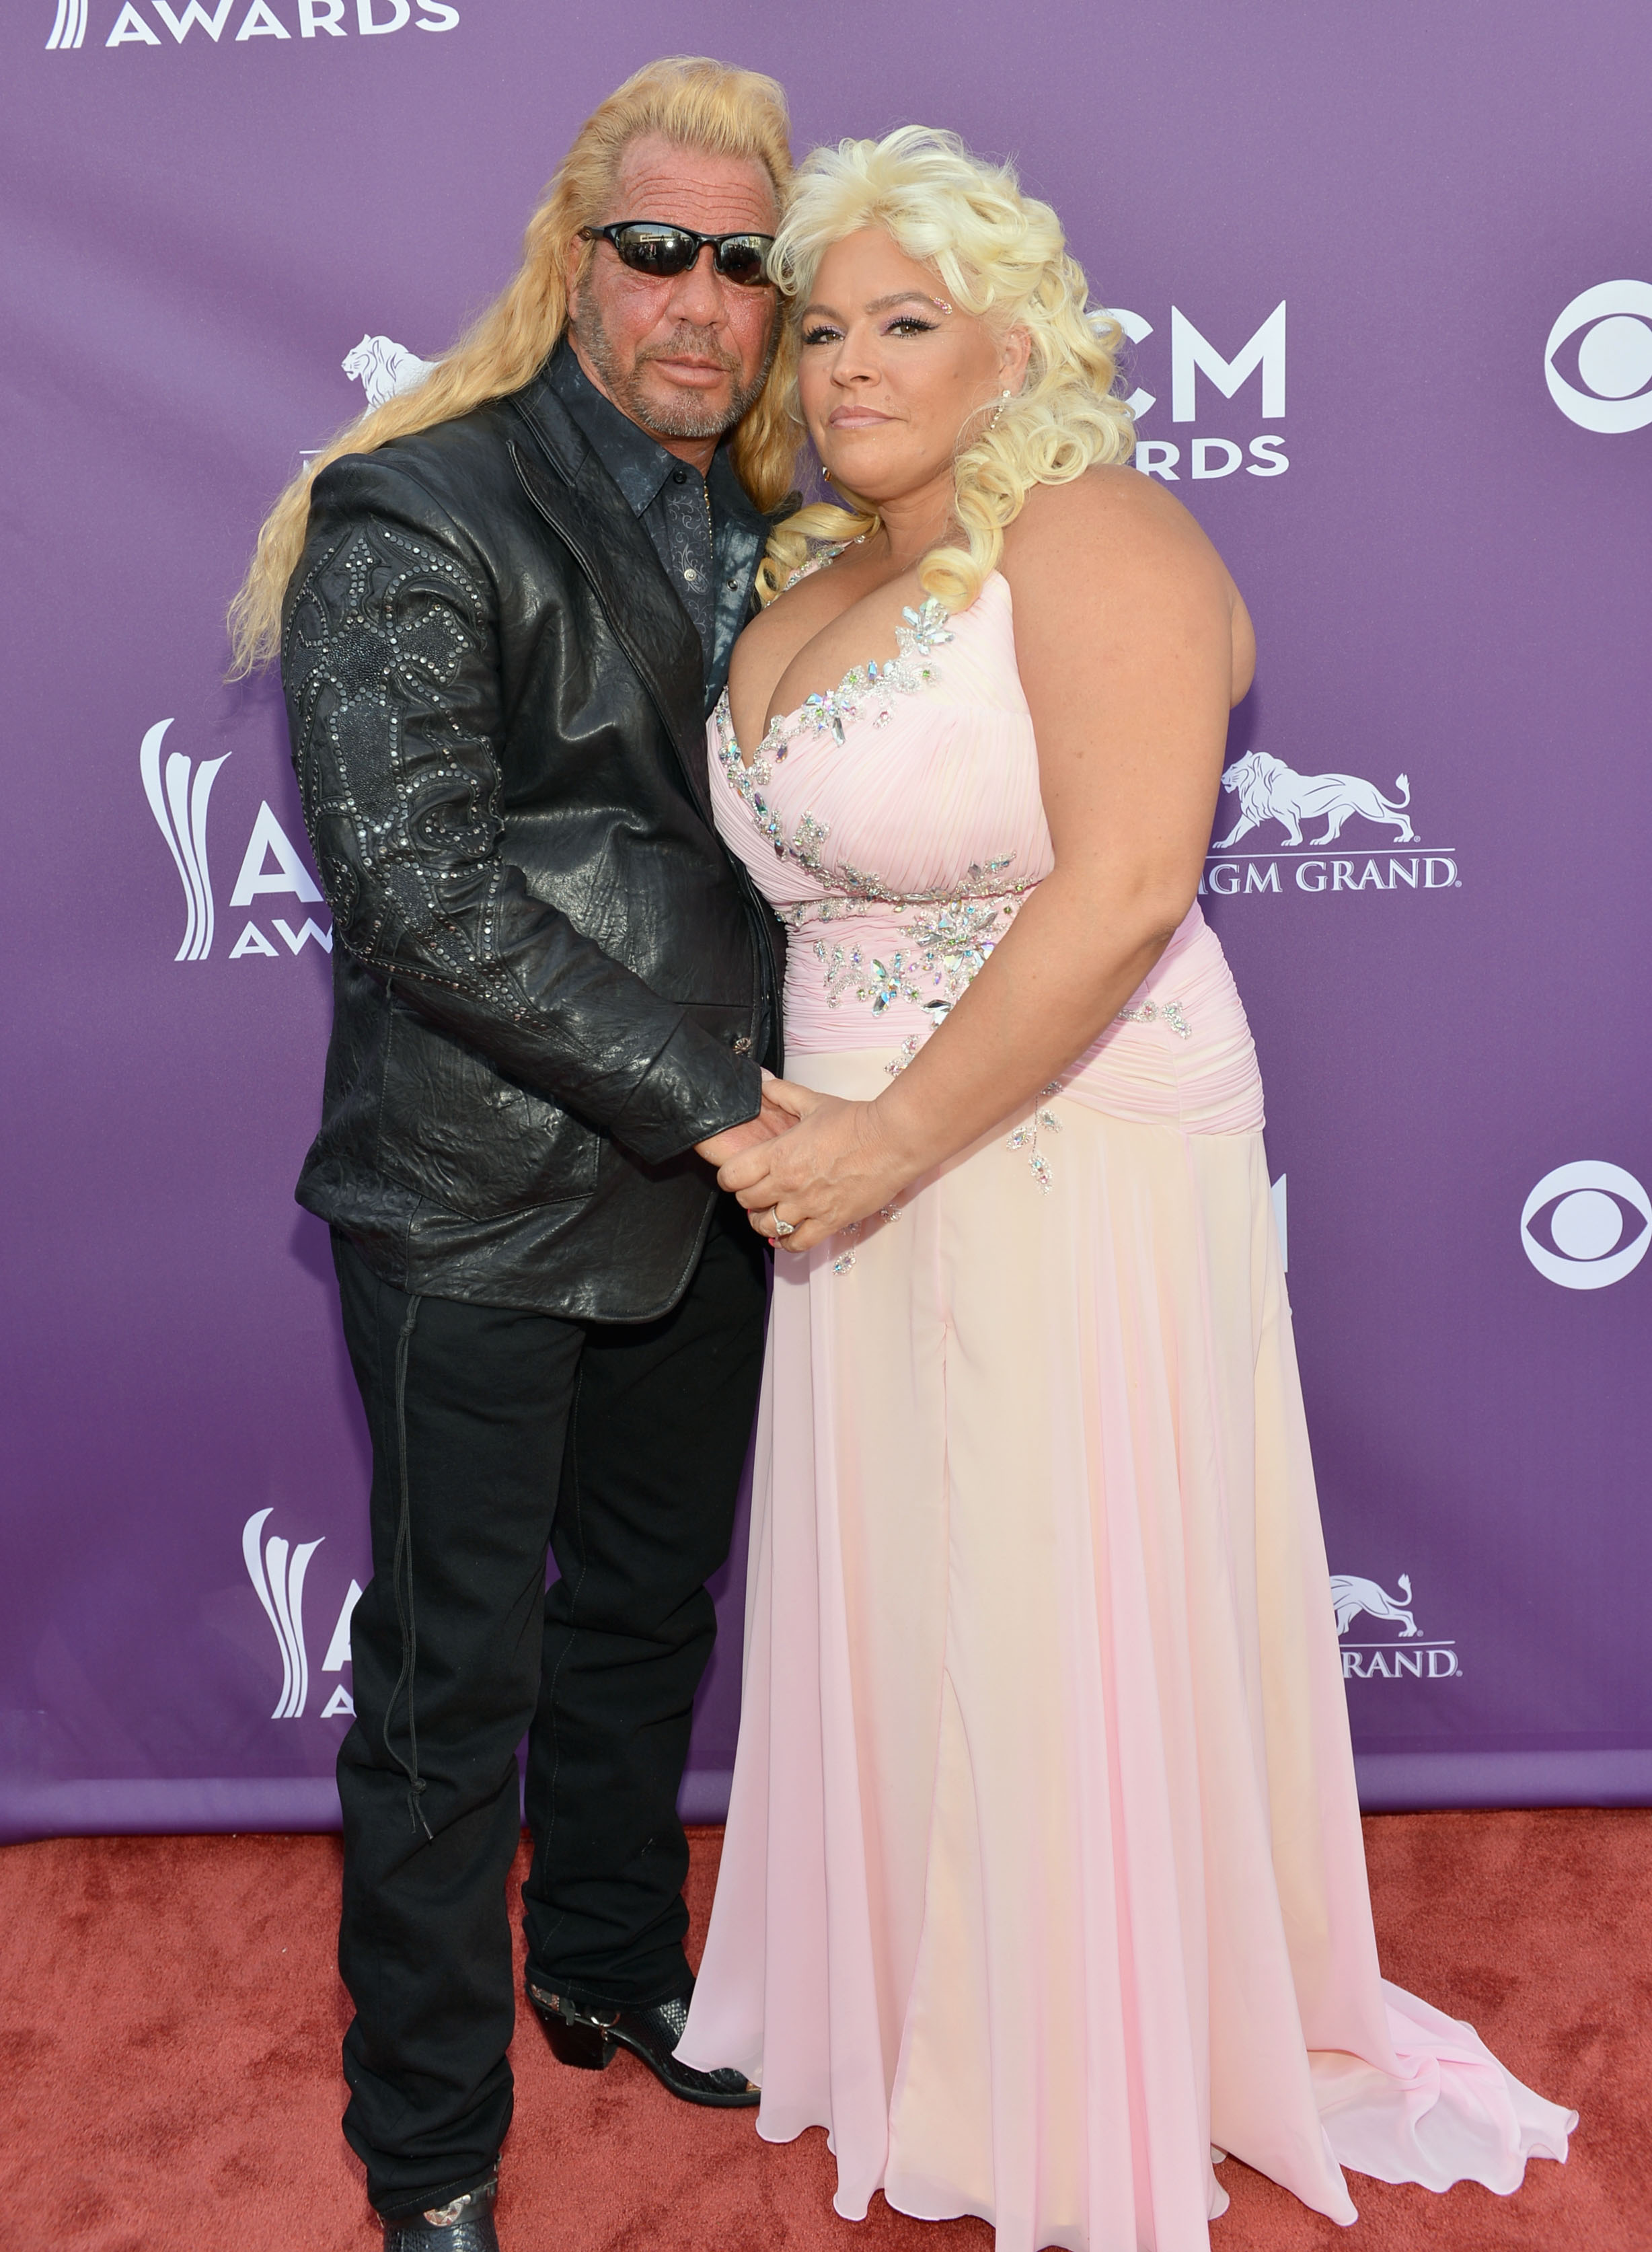 Duane and Beth Chapman at the 48th Annual Academy Of Country Music Awards in Las Vegas, Nevada on April 7, 2013 | Source: Getty Images